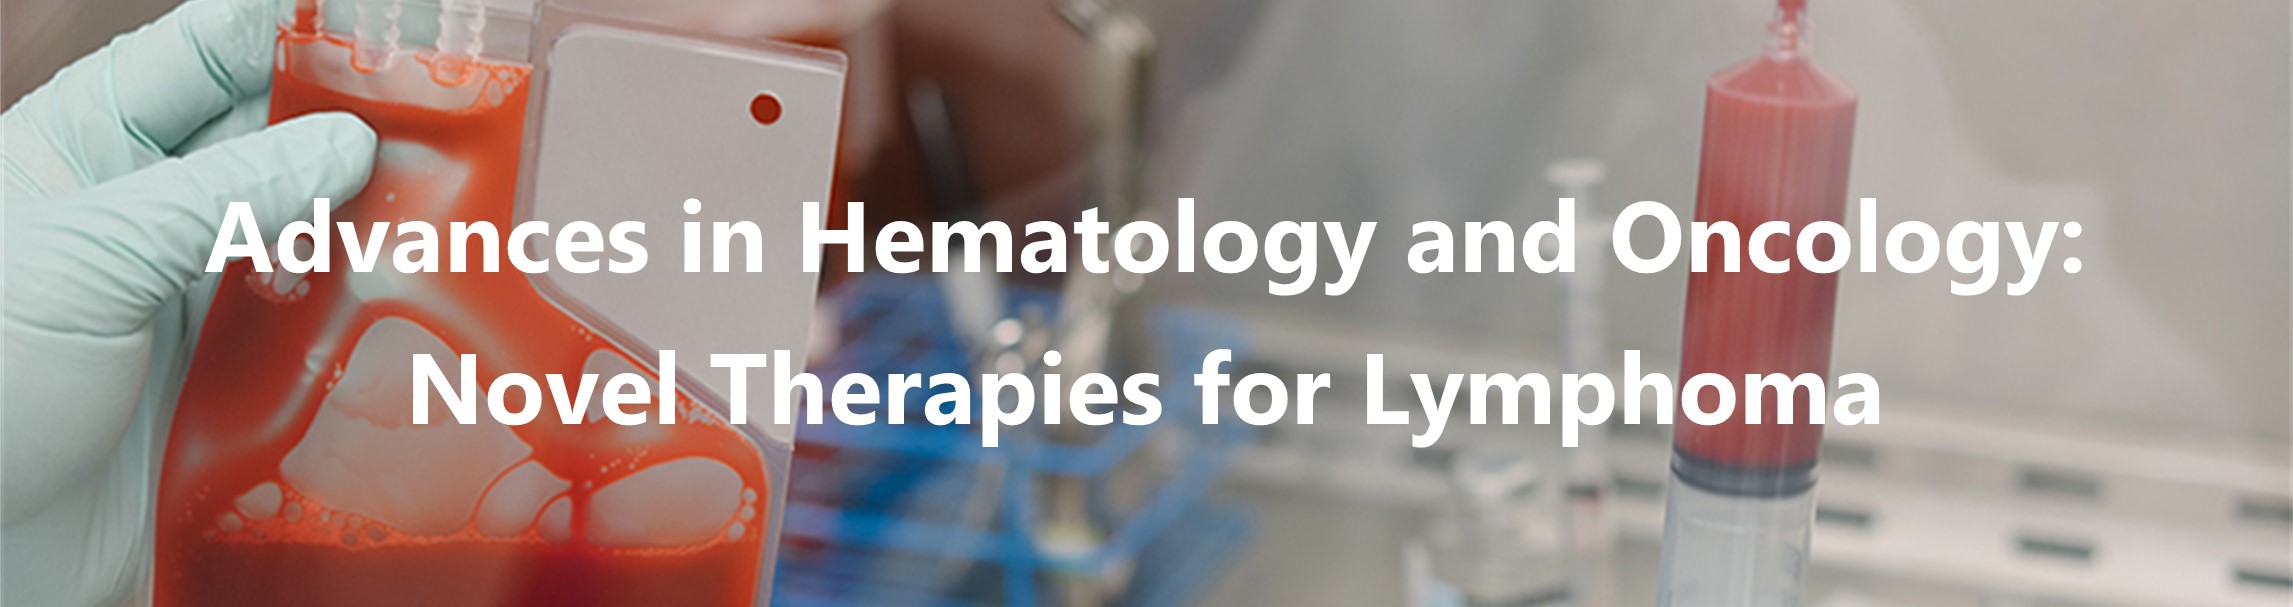 Advances in Hematology and Oncology: Novel Therapies for Lymphoma Banner